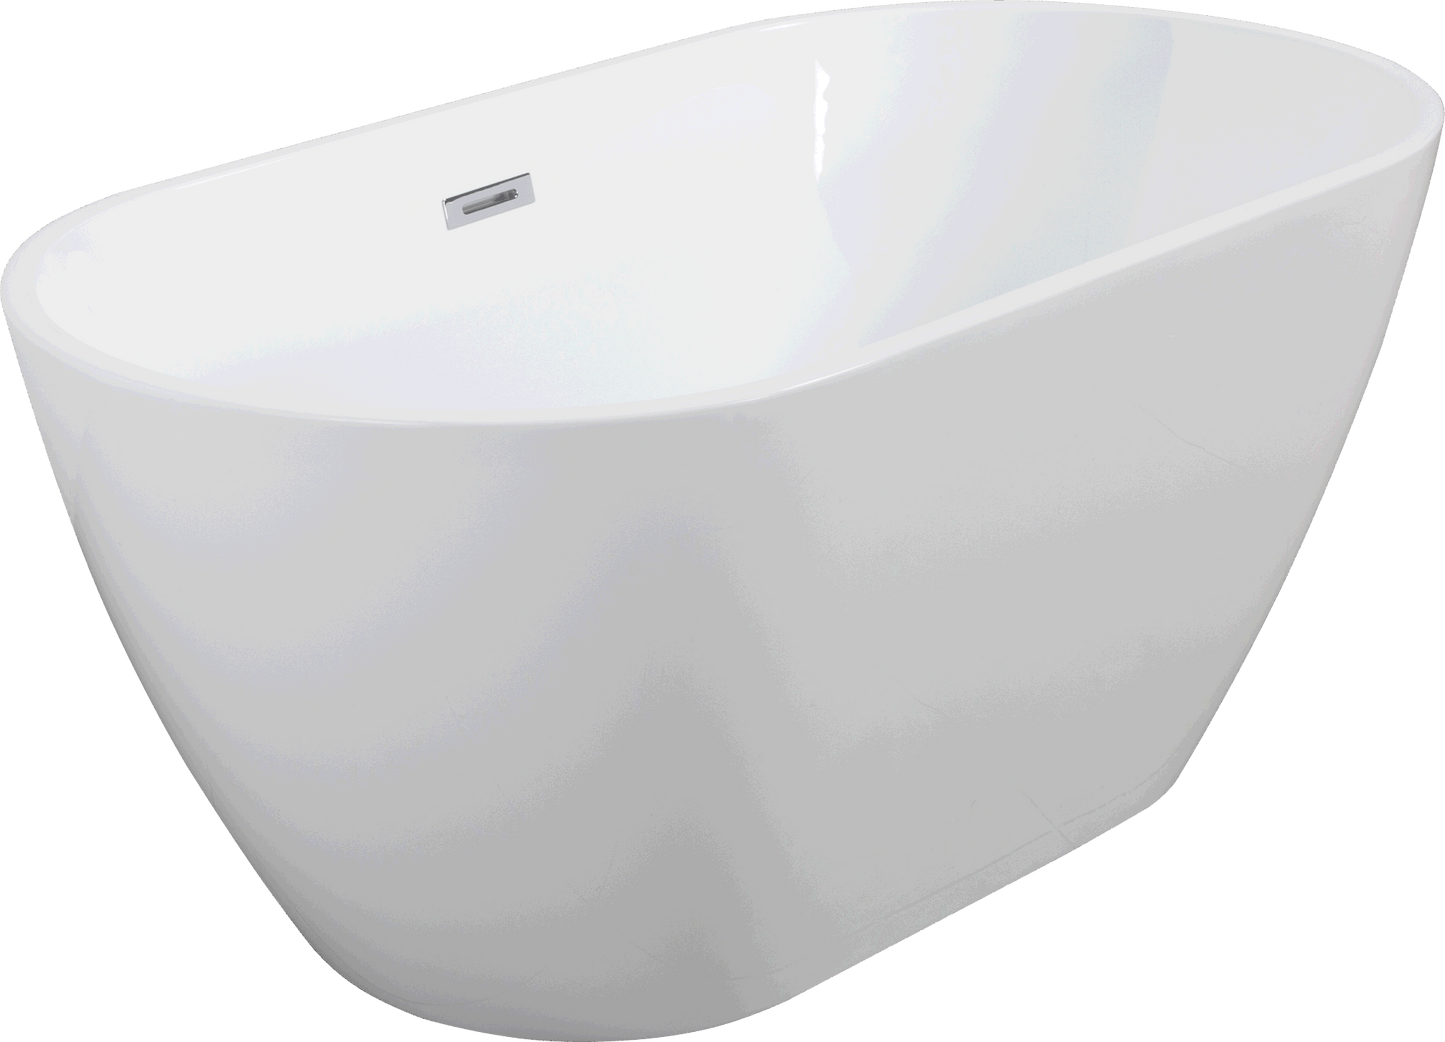 Shiny White Acrylic Freestanding Soaking Bathtub with Chrome Overflow and Drain, cUPC Certified - 63*28.8 22A09-63